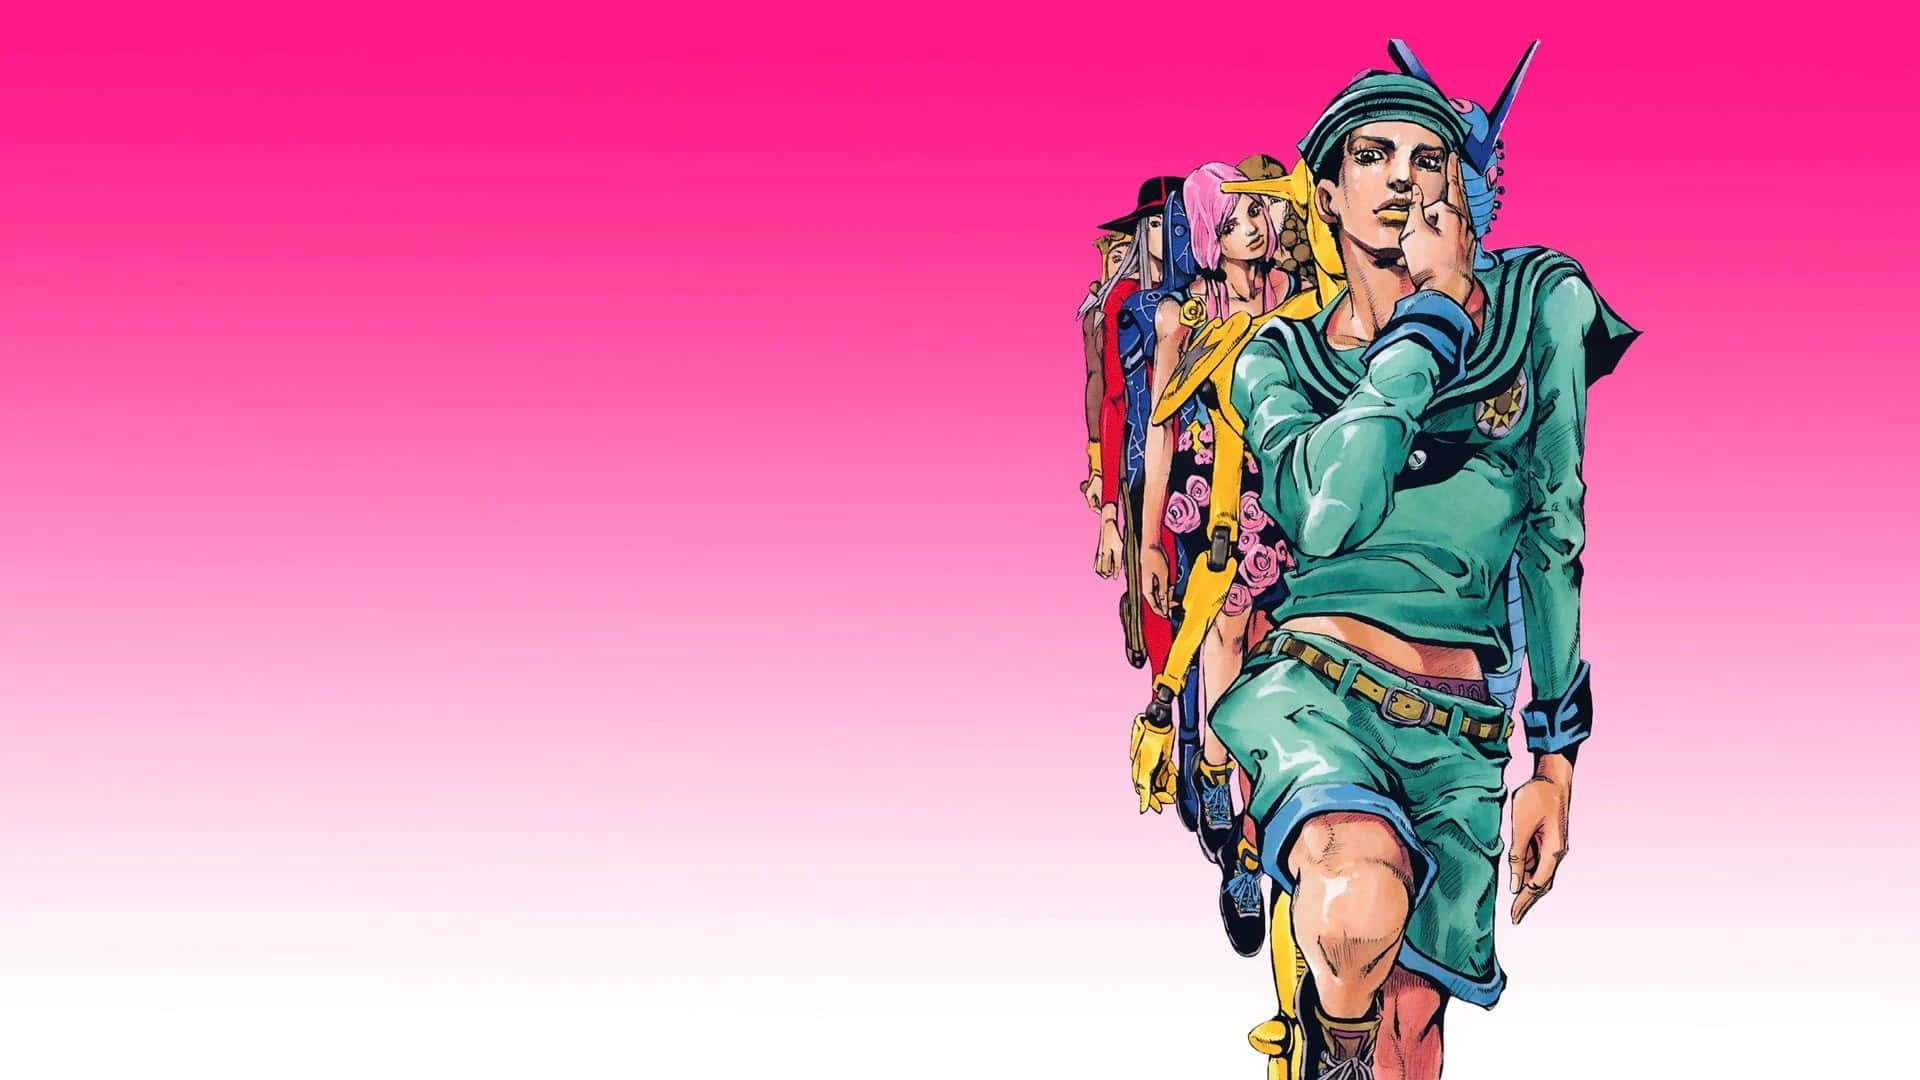 Fearless Jojo Pucci Takes On The Glitz and Glamour of Vento Aureo